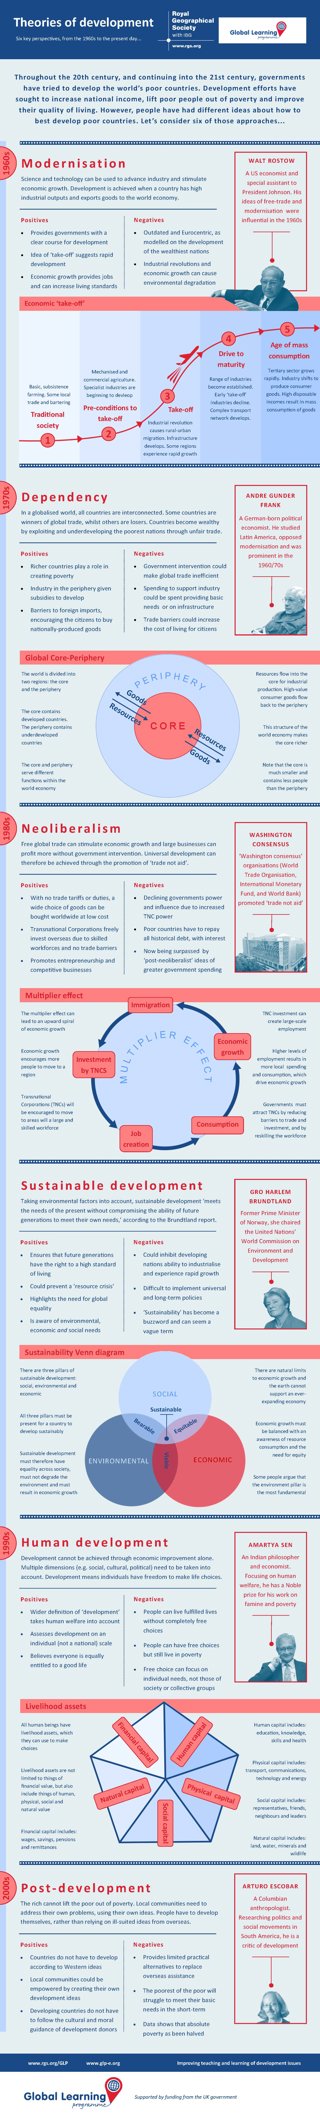 An infographic showing infomration about development